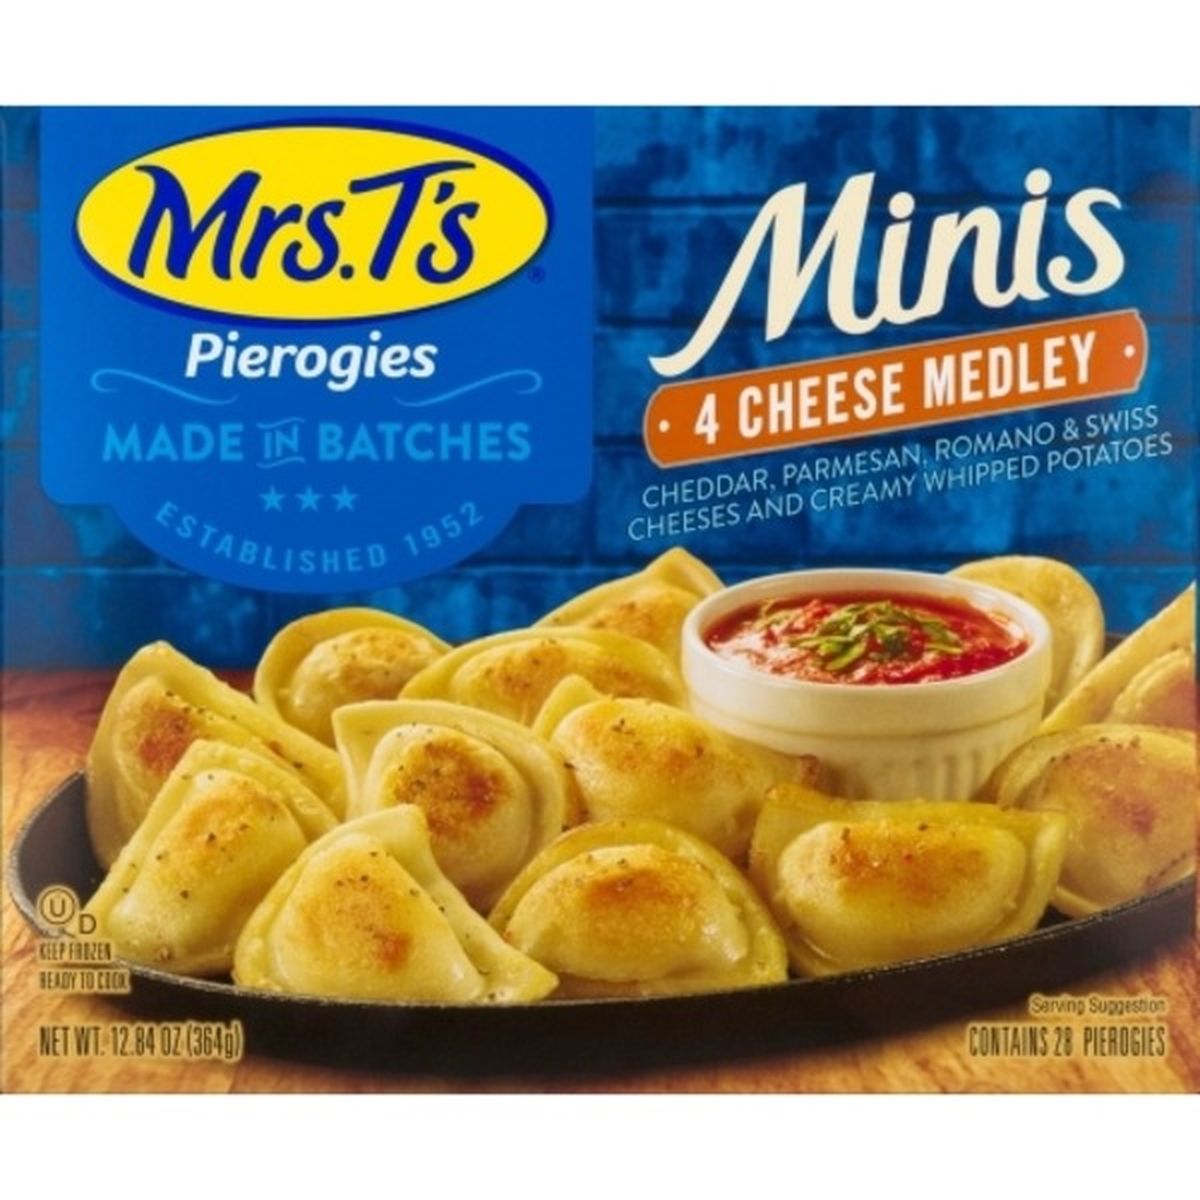 Calories in Mrs Ts Pierogies, 4 Cheese Medley, Minis